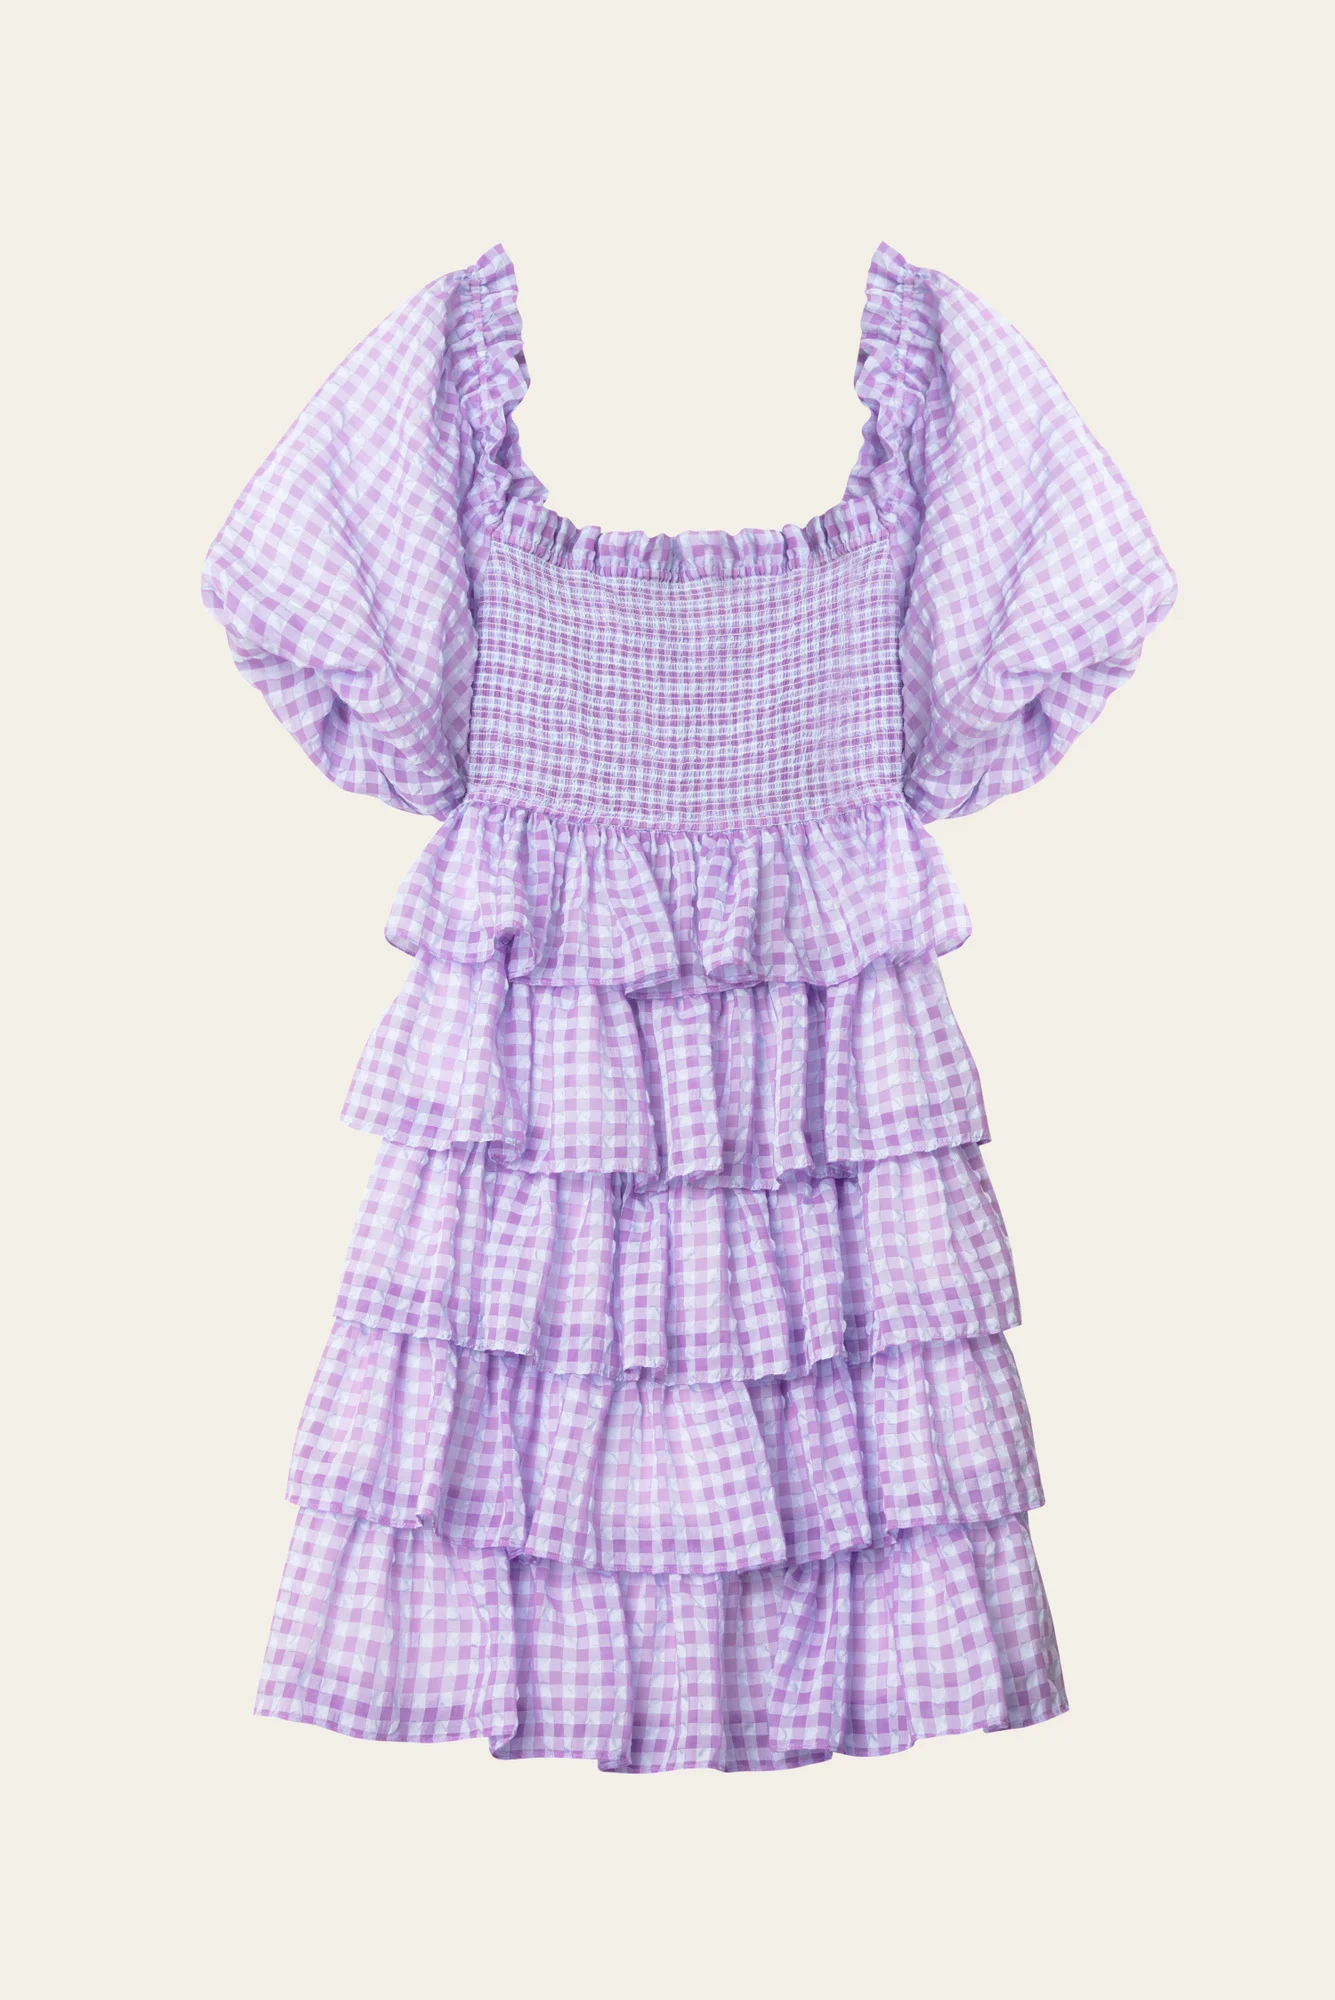 BY MALINA Lilac Check Colette Dress